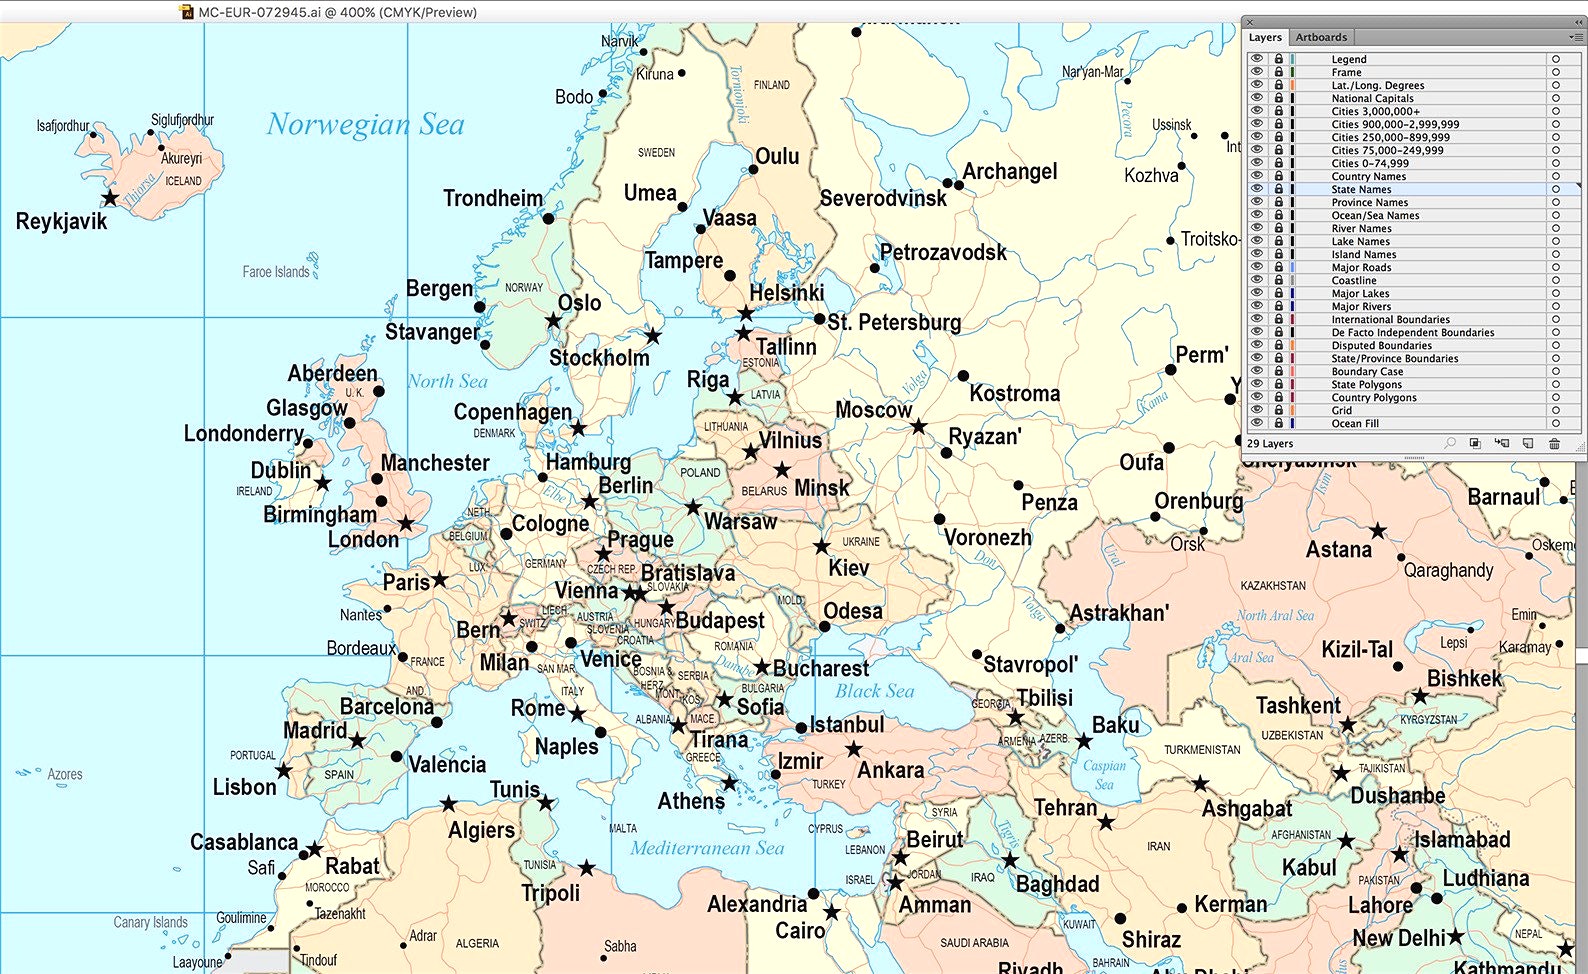 Detailed Map of Europe with Countries and Cities